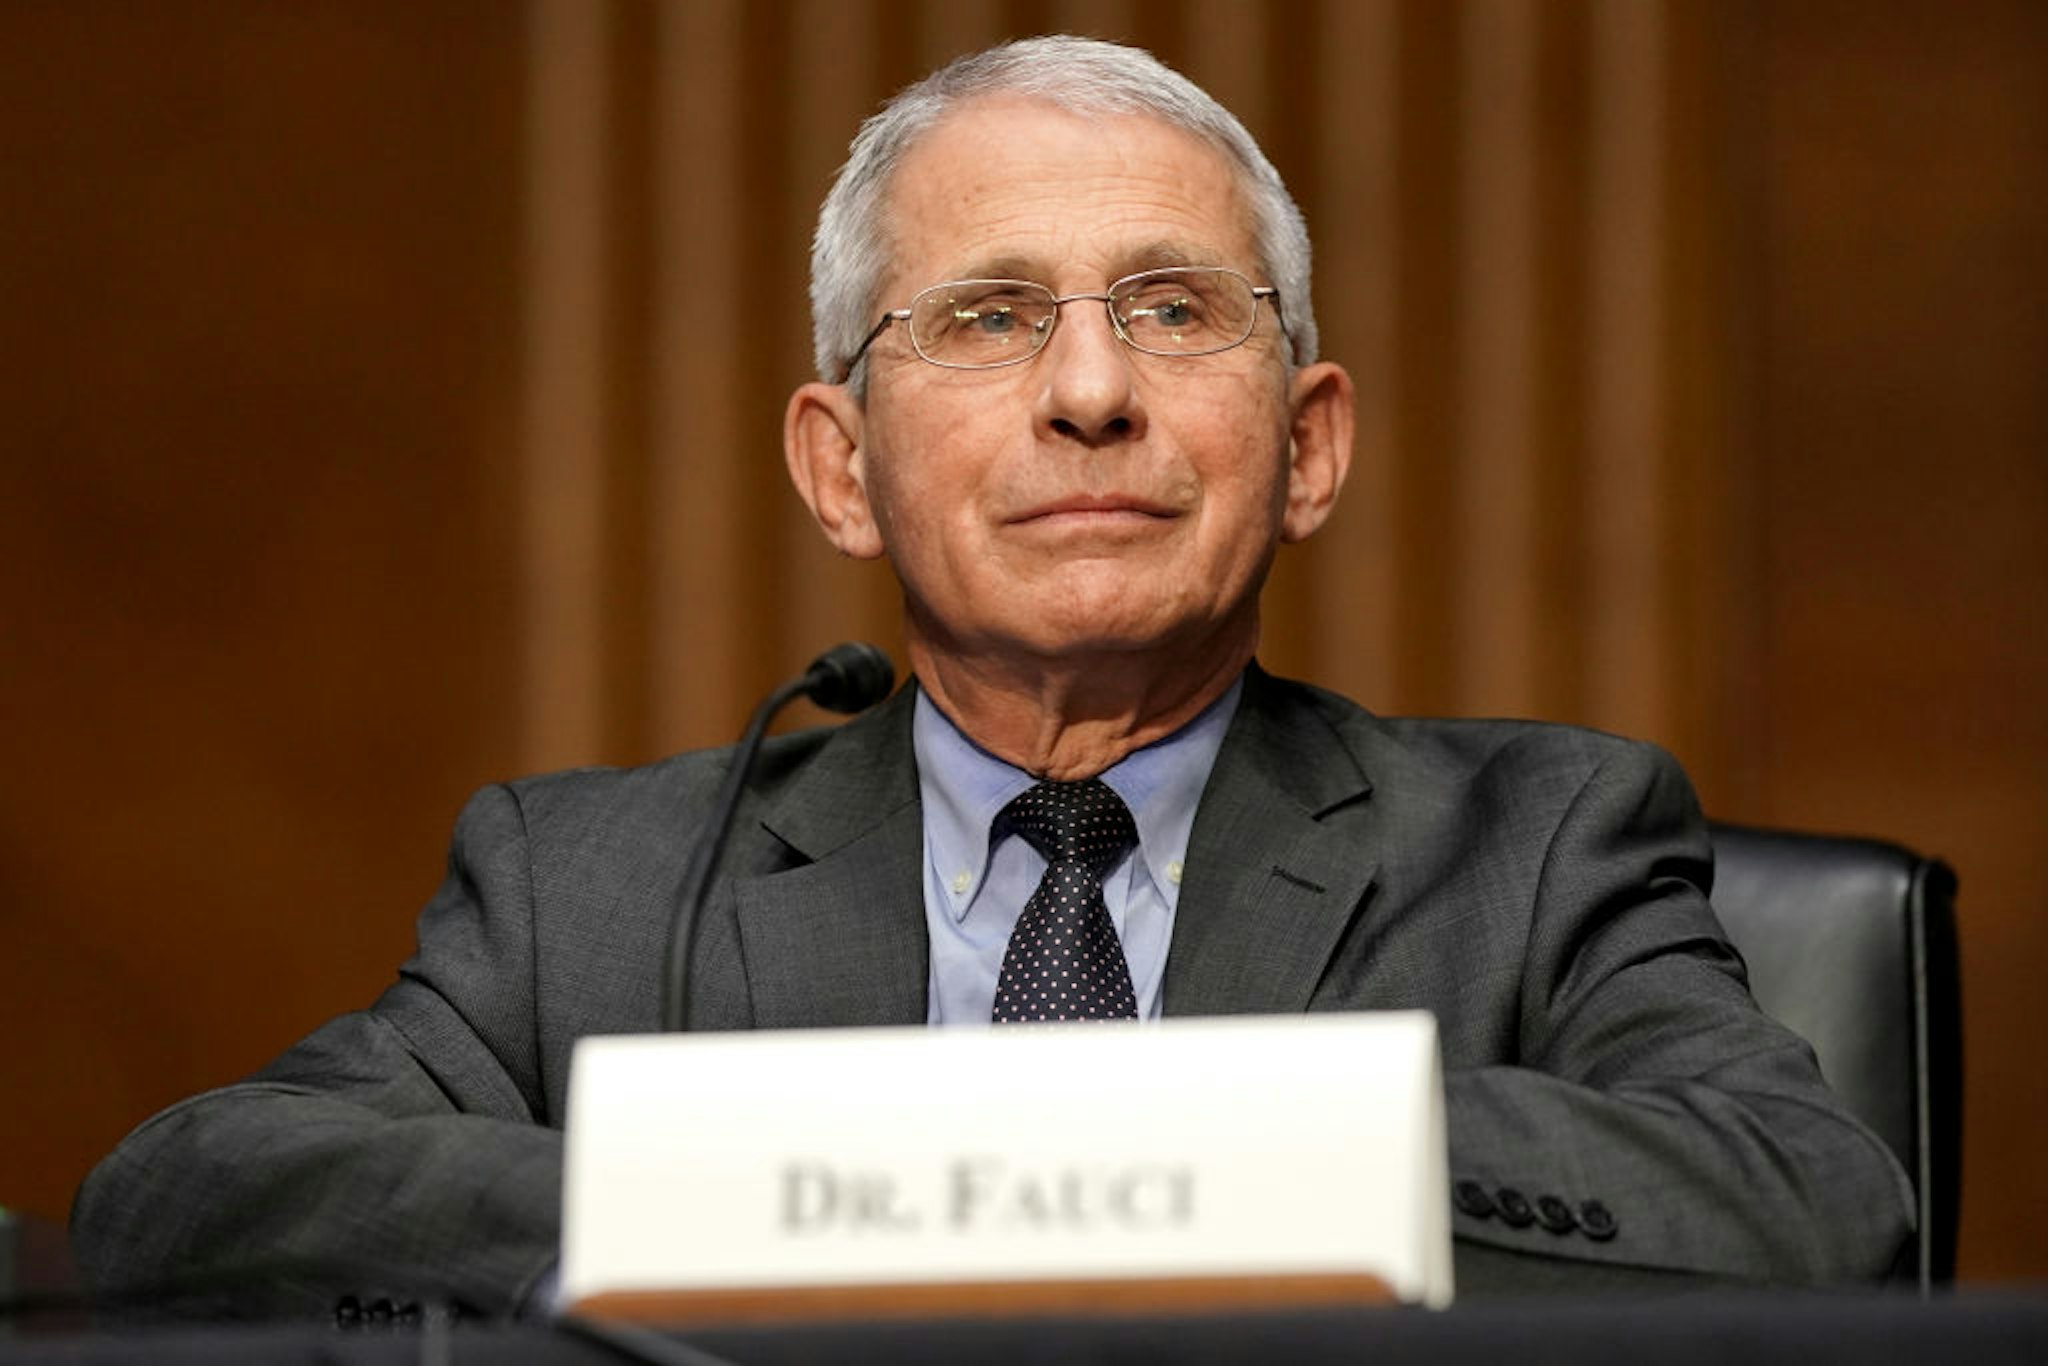 Dr. Anthony Fauci, director of the National Institute of Allergy and Infectious Diseases, speaks during a Senate Health, Education, Labor and Pensions Committee hearing to discuss the ongoing federal response to COVID-19 on May 11, 2021 in Washington, DC.